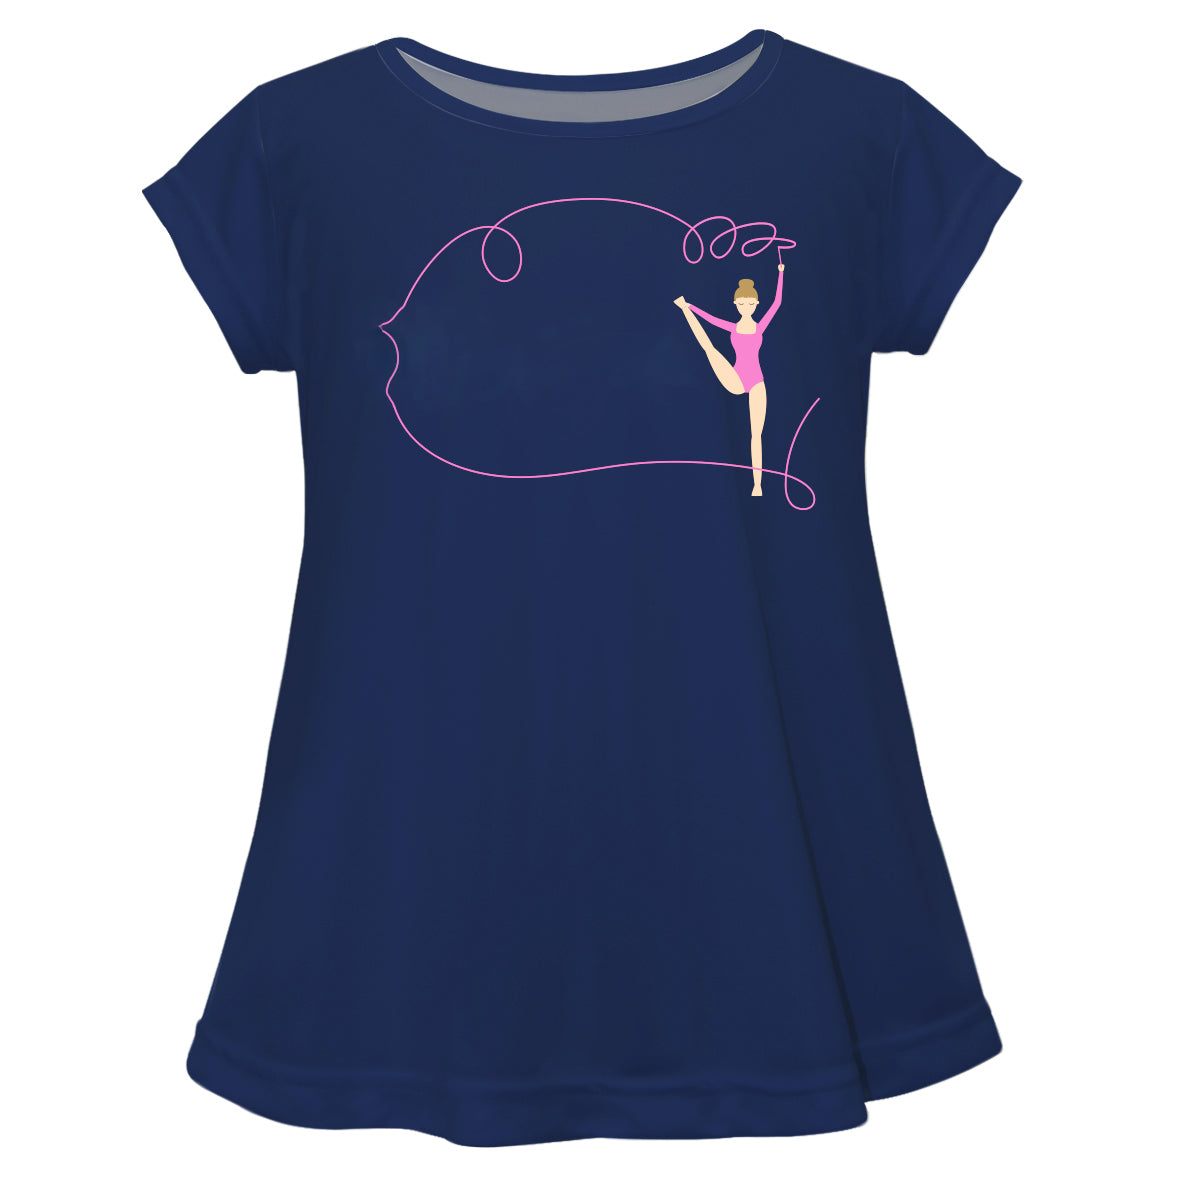 Gymnast Name Navy Short Sleeve Laurie Top - Wimziy&Co.